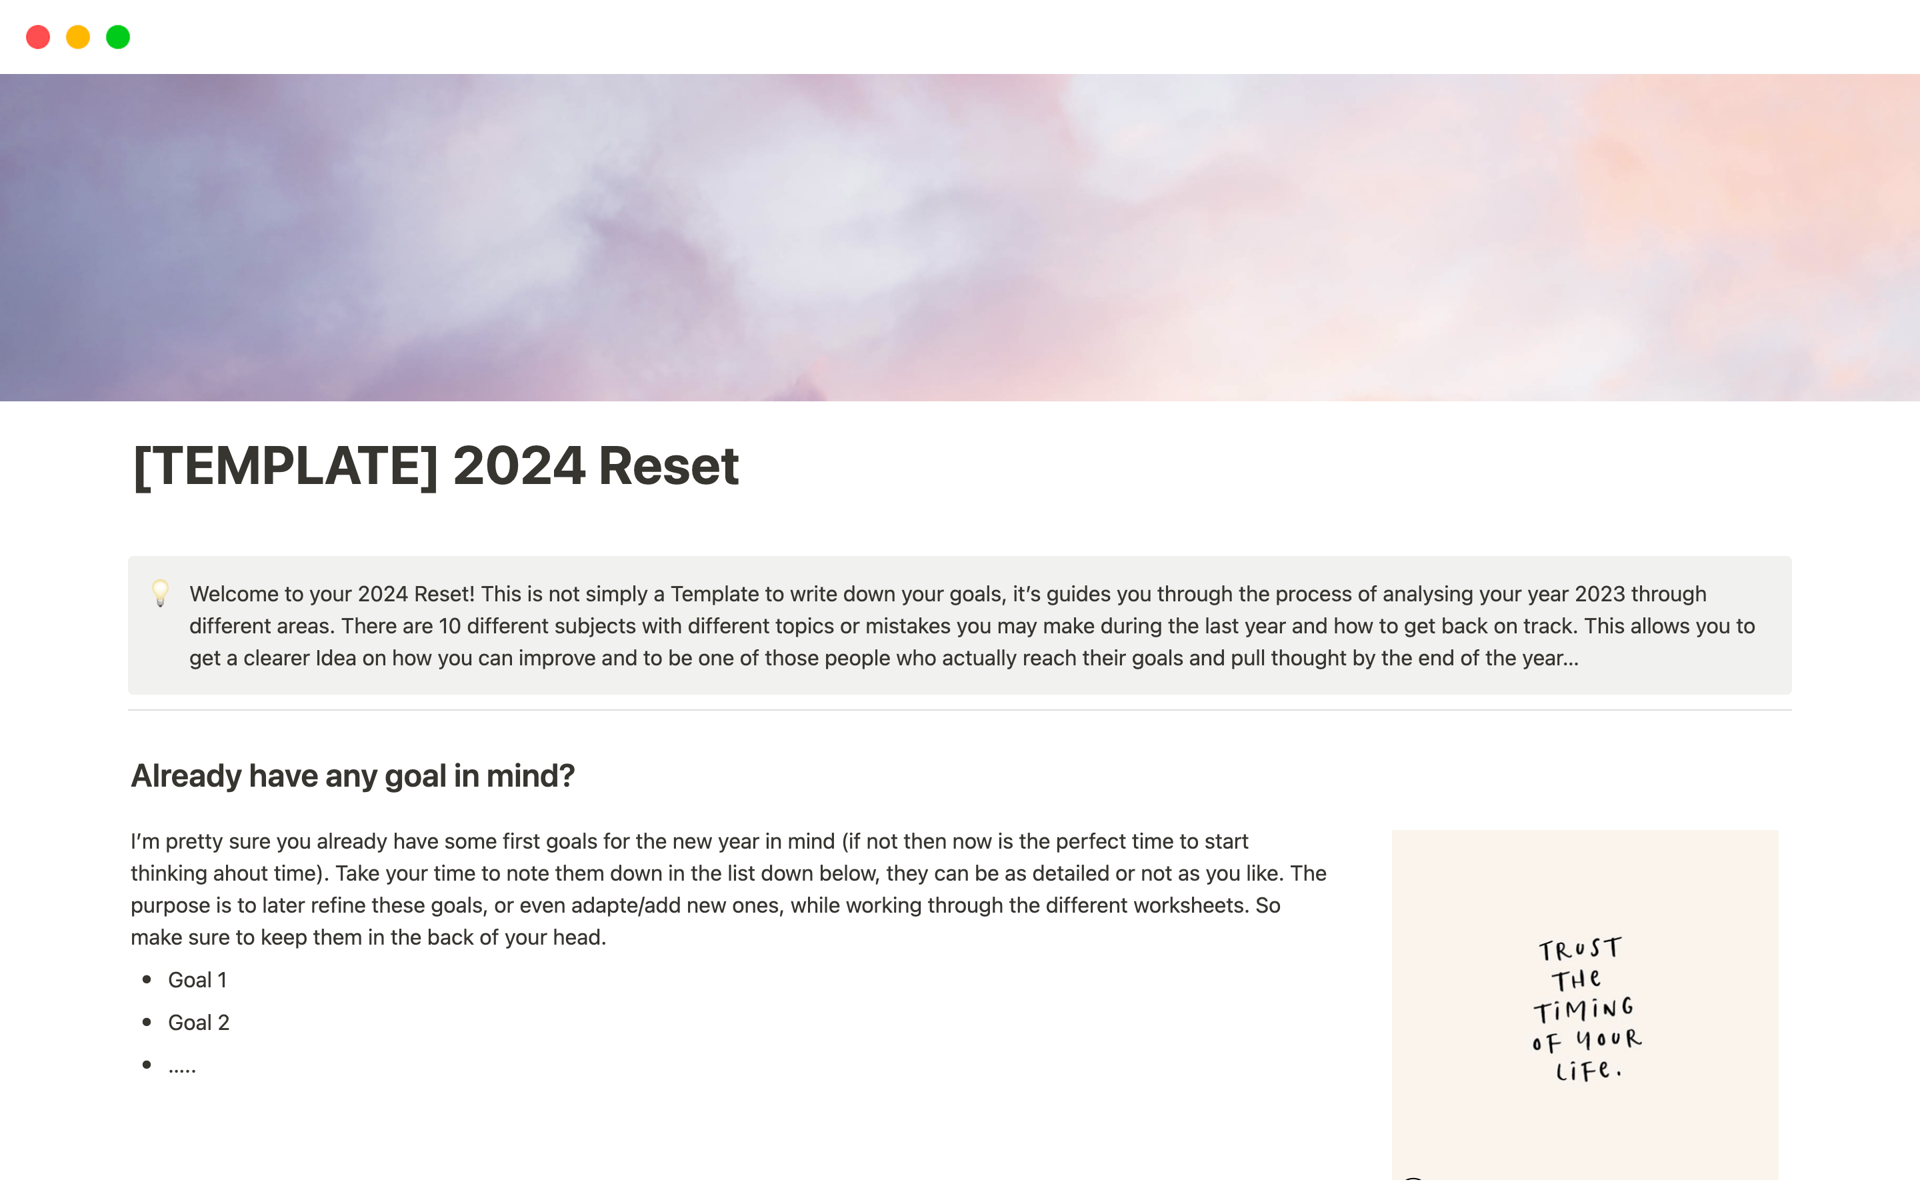 A template preview for 2024 Reset